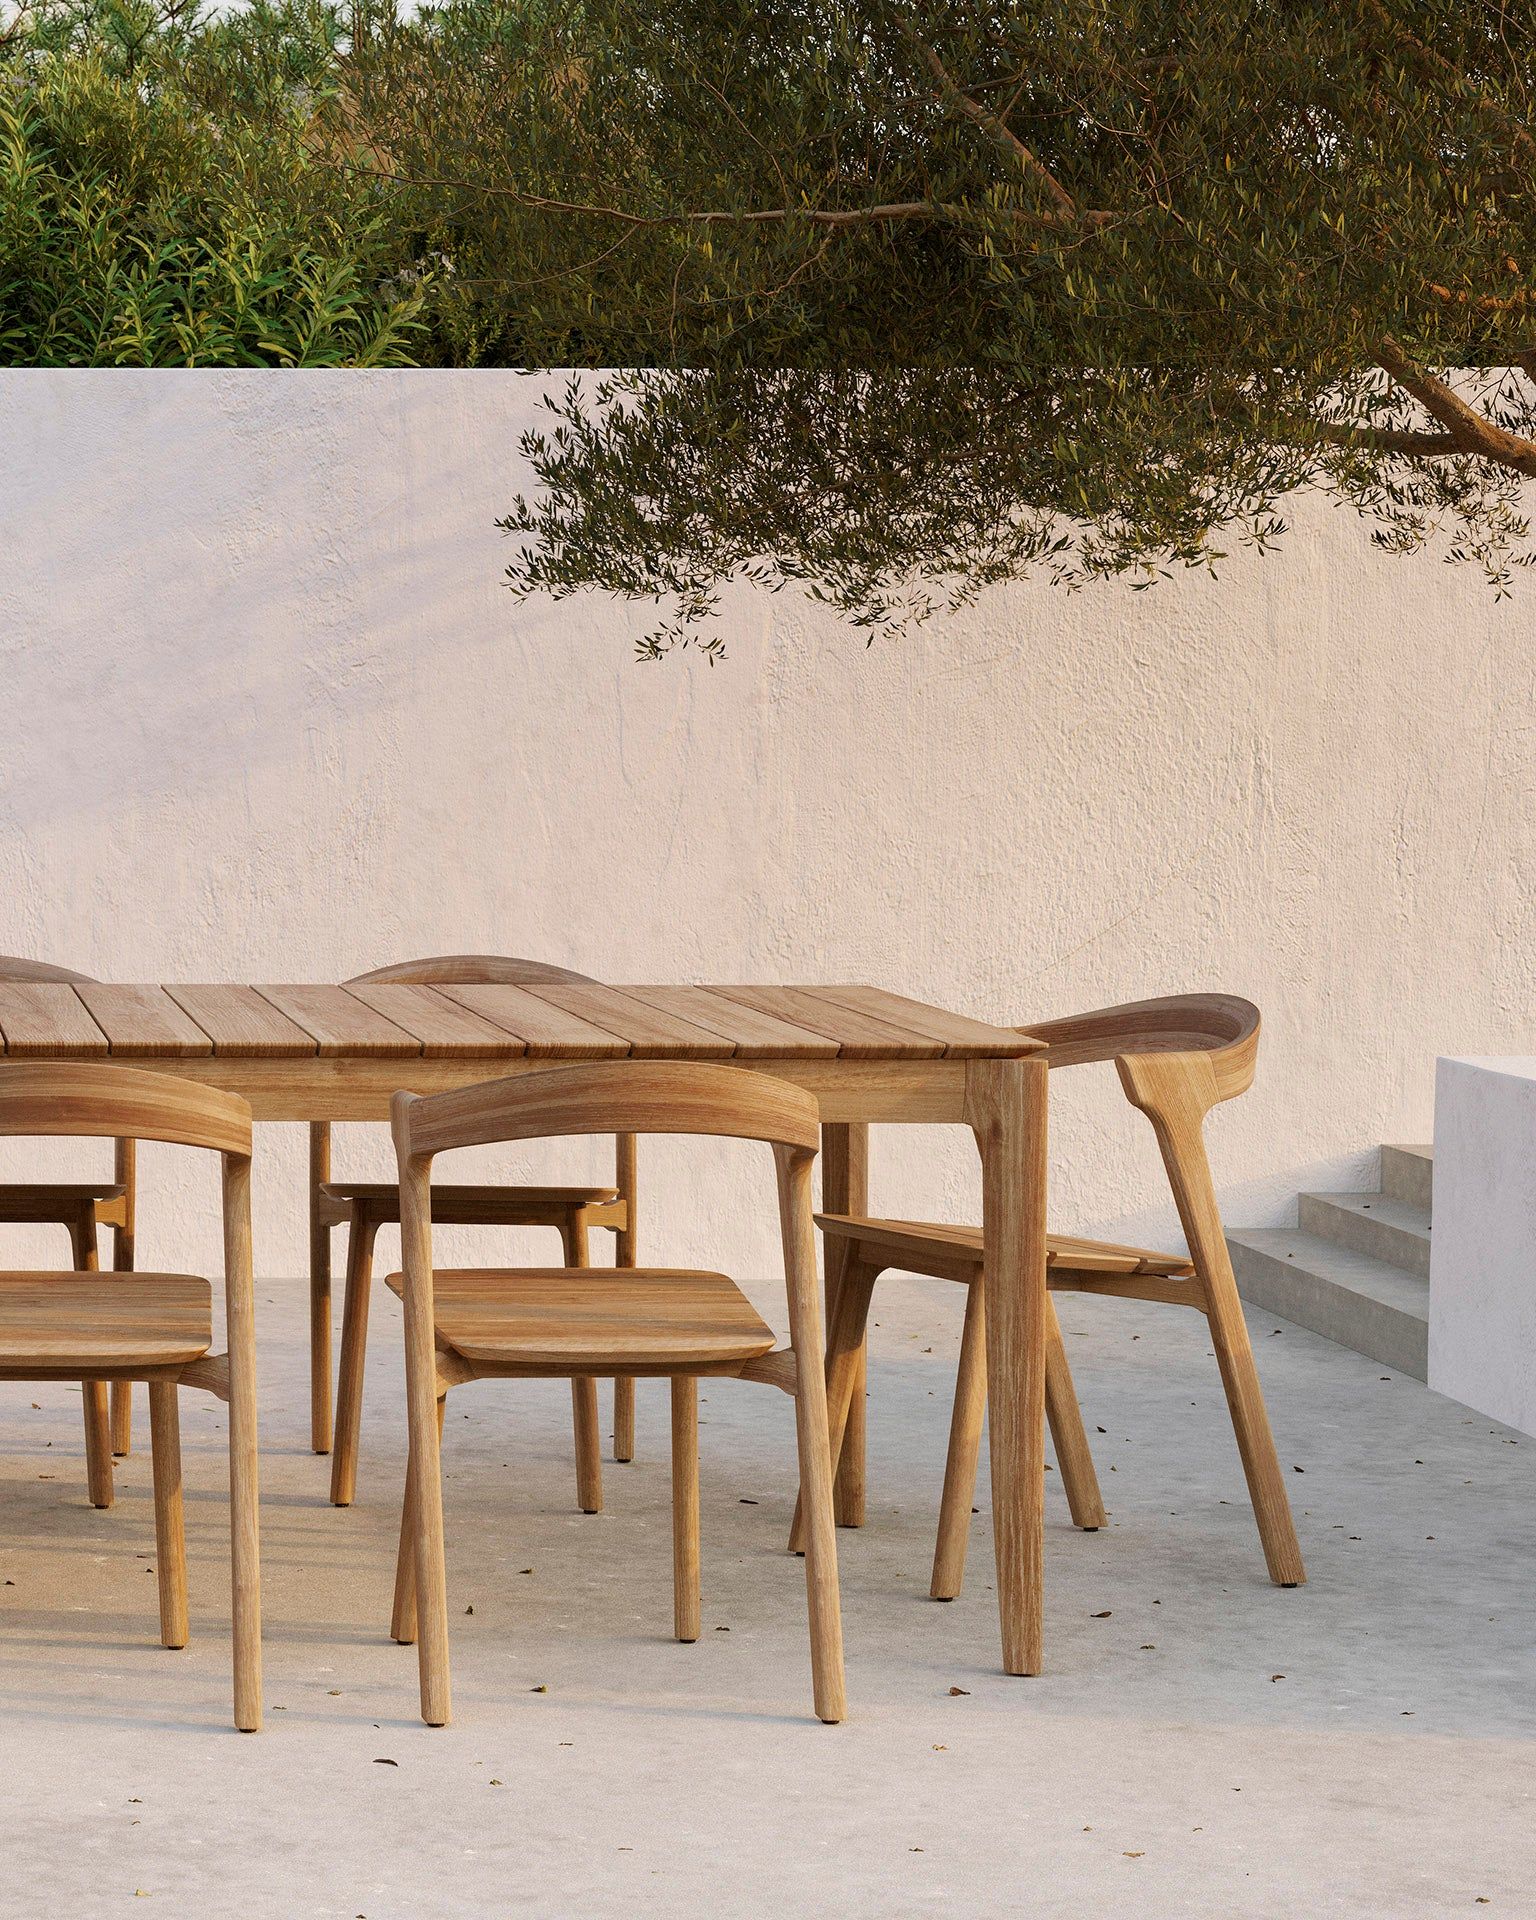 The Durable Beauty of Teak Outdoor Furniture